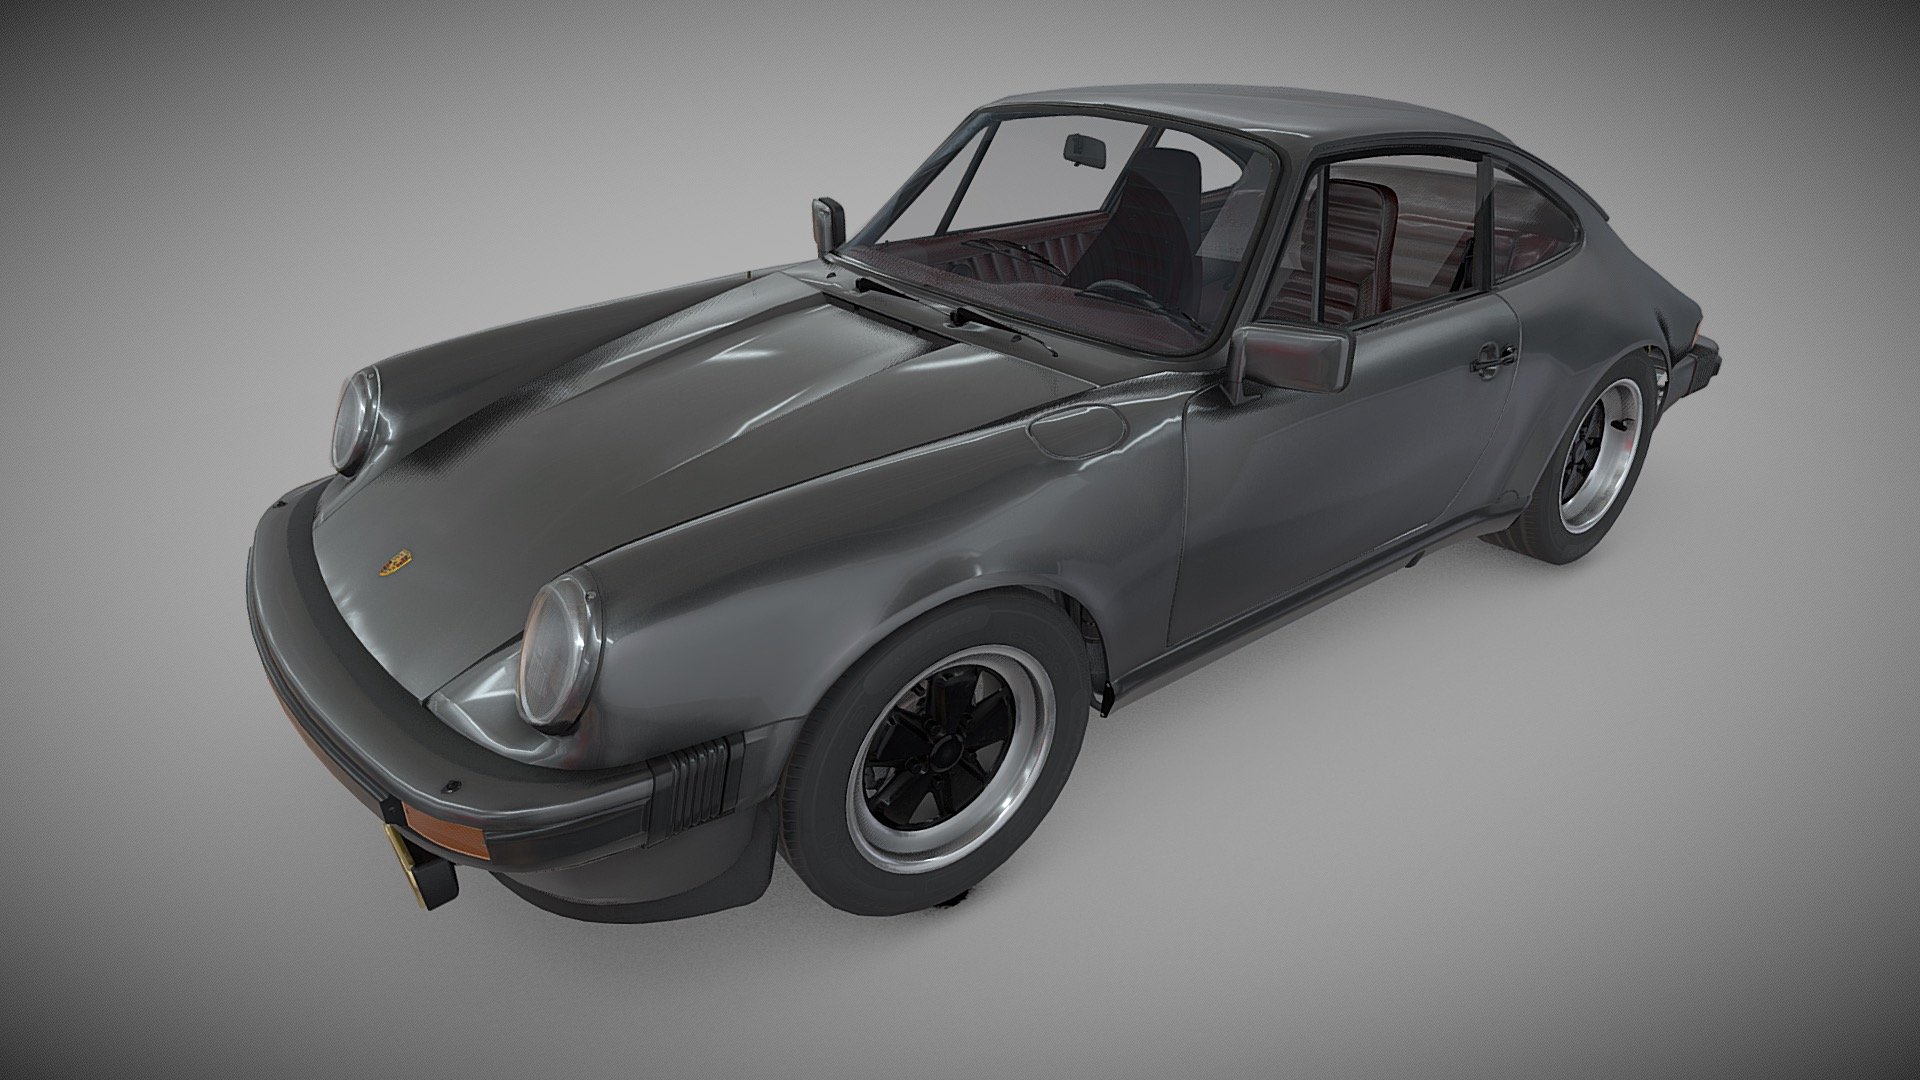 The 911 SC with 3.0 litre Flat Six engine. In anthrazit metallic with burgundy interior. 
The model is complete and correct, remade several times to match the exact measures and technical details. Includes the flatsix engine model with 915 gearbox.
You can have a look at all the details in an animated version here

The boot interior, cabin, engine, chassis, everything is there. I didn't bake the textures or the mesh to make all the separate models available and ready to rig 3d model